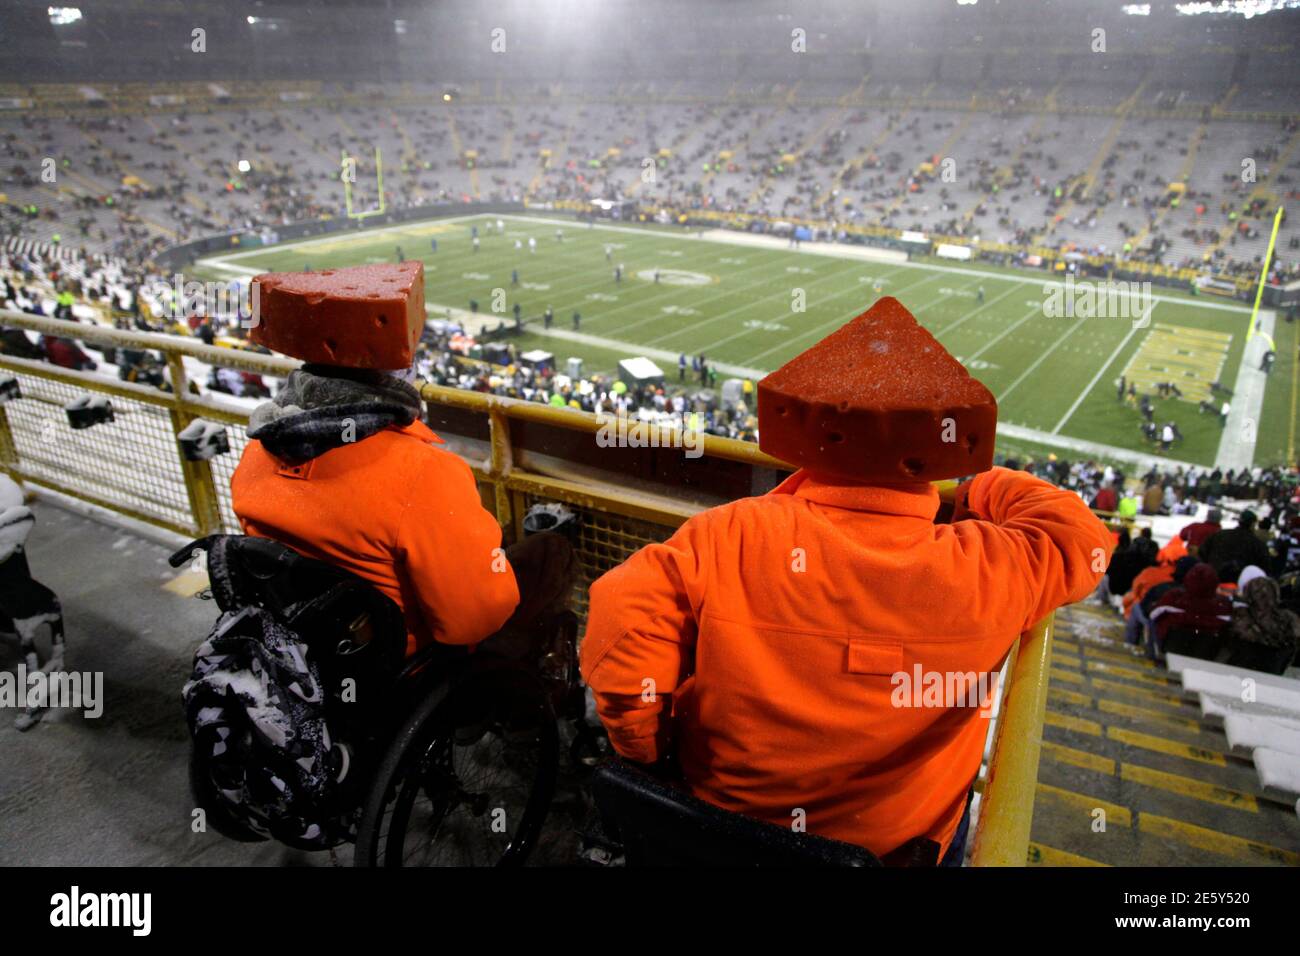 Fans dressed in hunter orange wait in the snow before the NFL football game against the Green Bay Packers and the Detroit Lions in Green Bay, Wisconsin December 9, 2012. REUTERS/Darren Hauck (UNITED STATES - Tags: SPORT FOOTBALL) Stock Photo